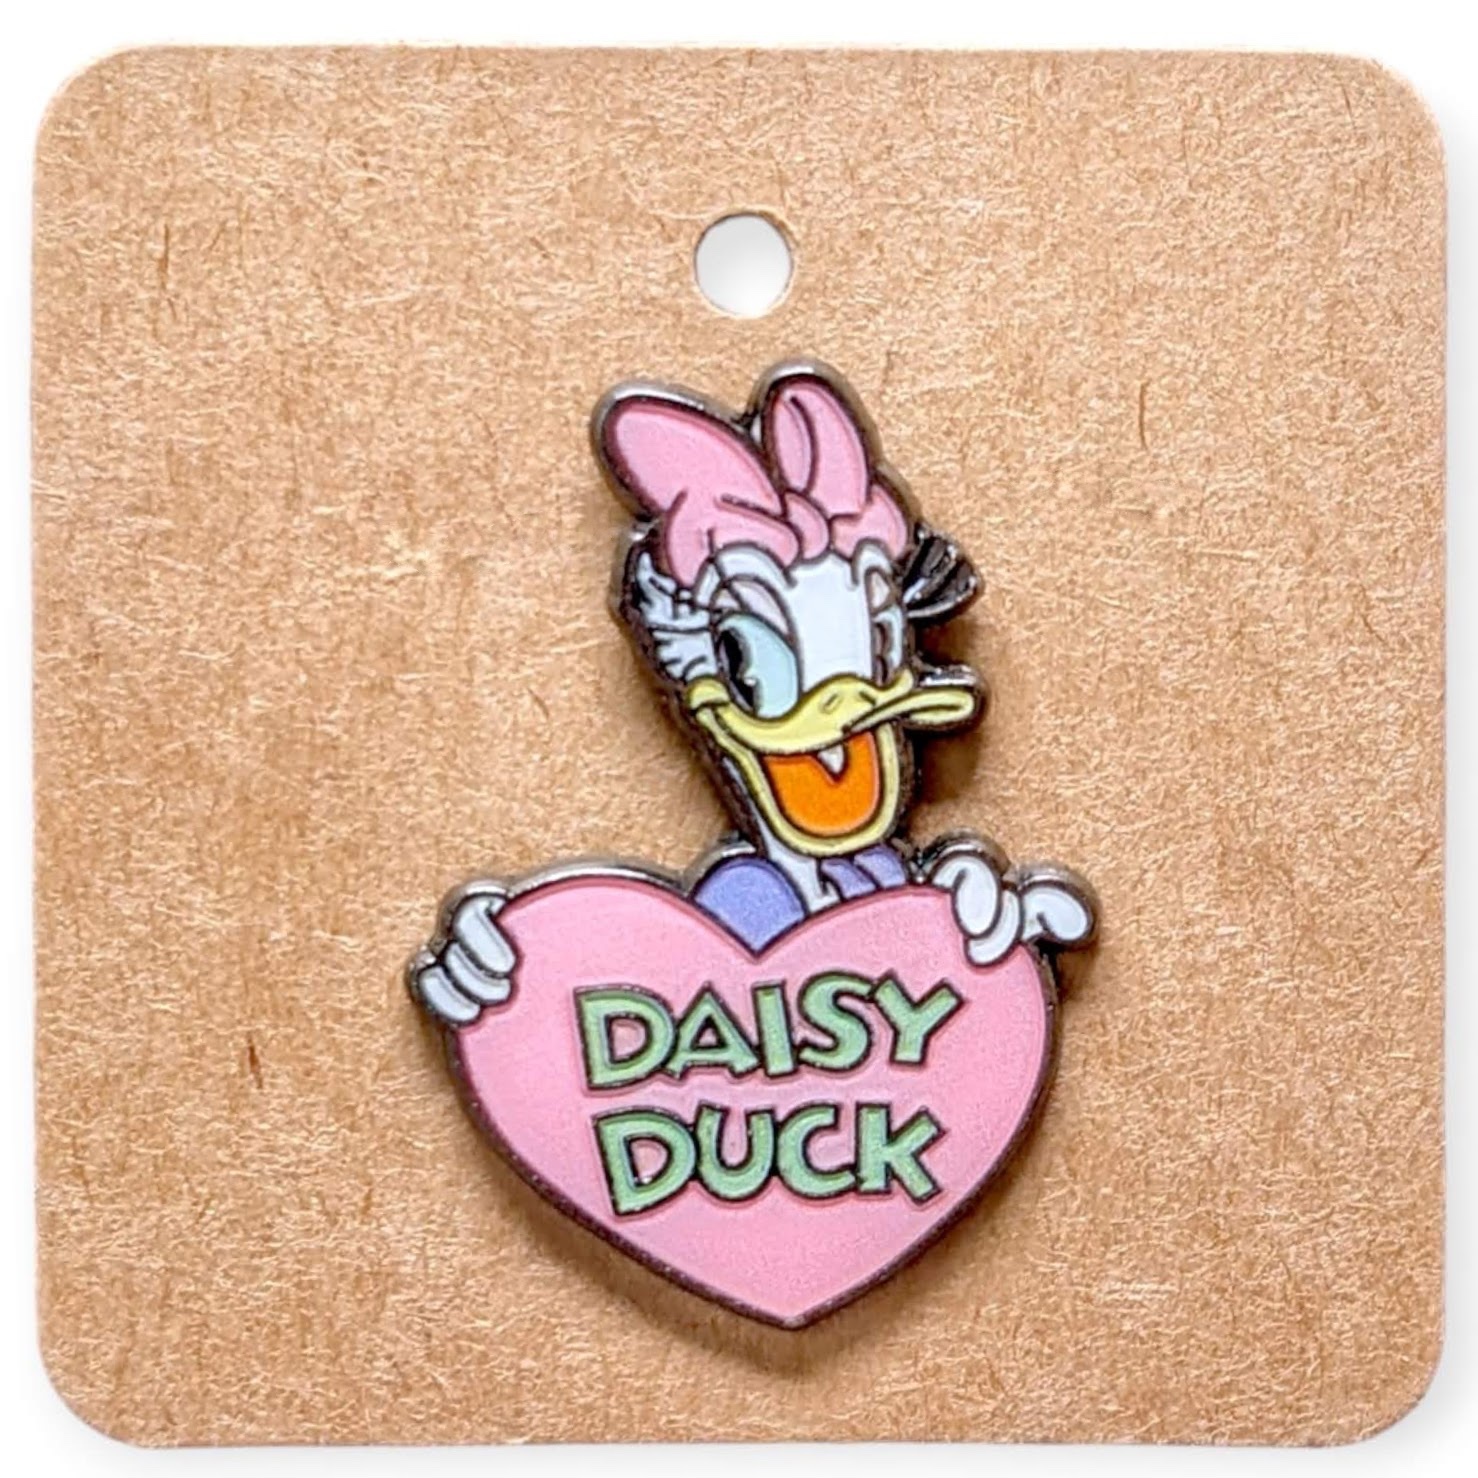 Primary image for Daisy Duck Disney Pin: Pink Heart